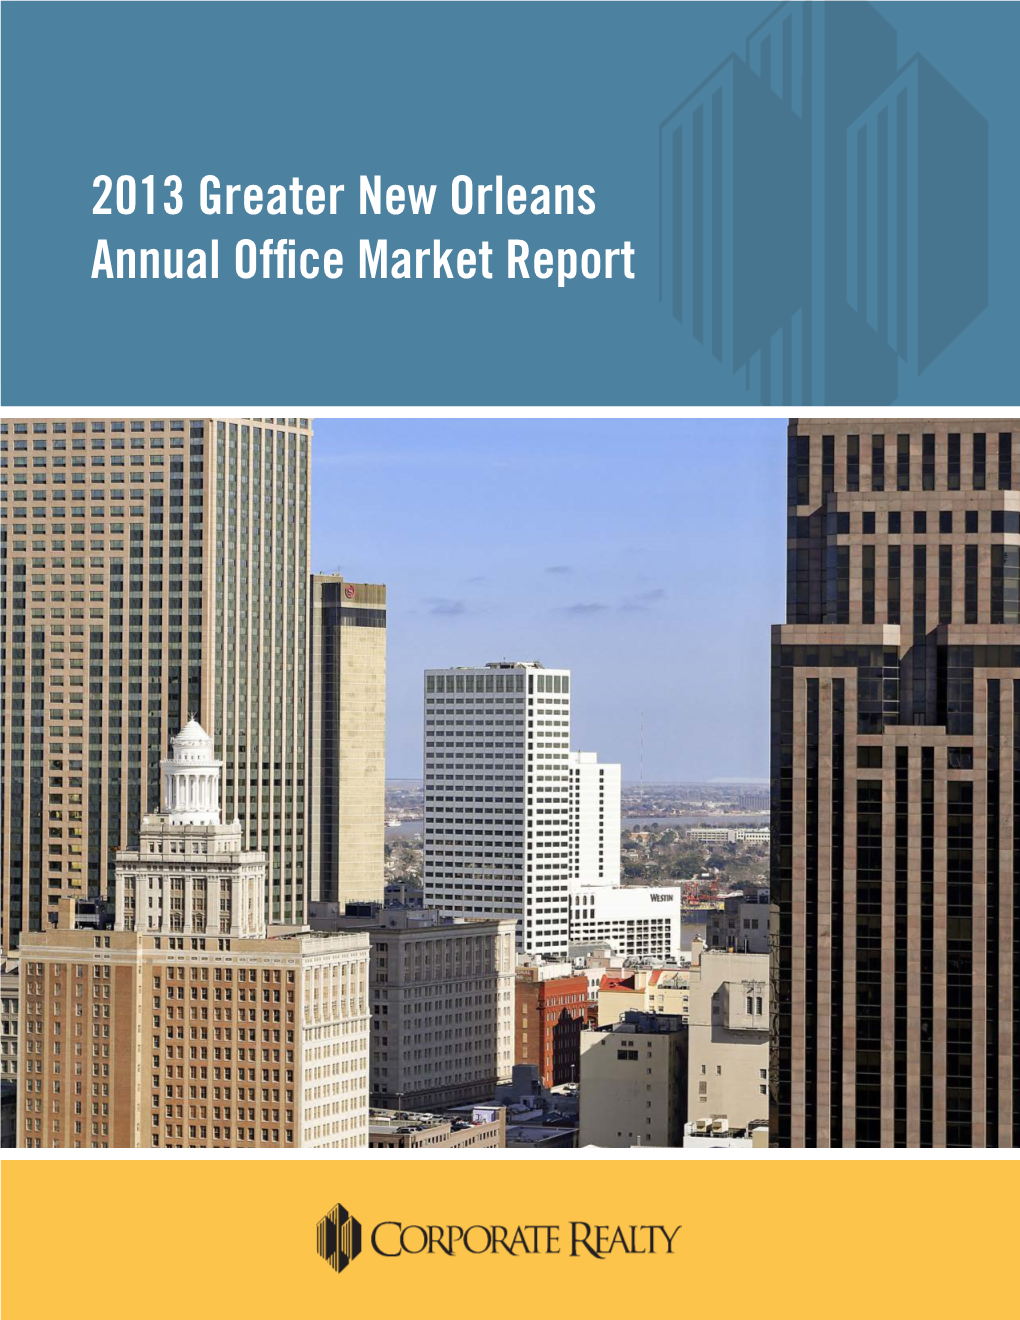 2013 Greater New Orleans Annual Office Market Report